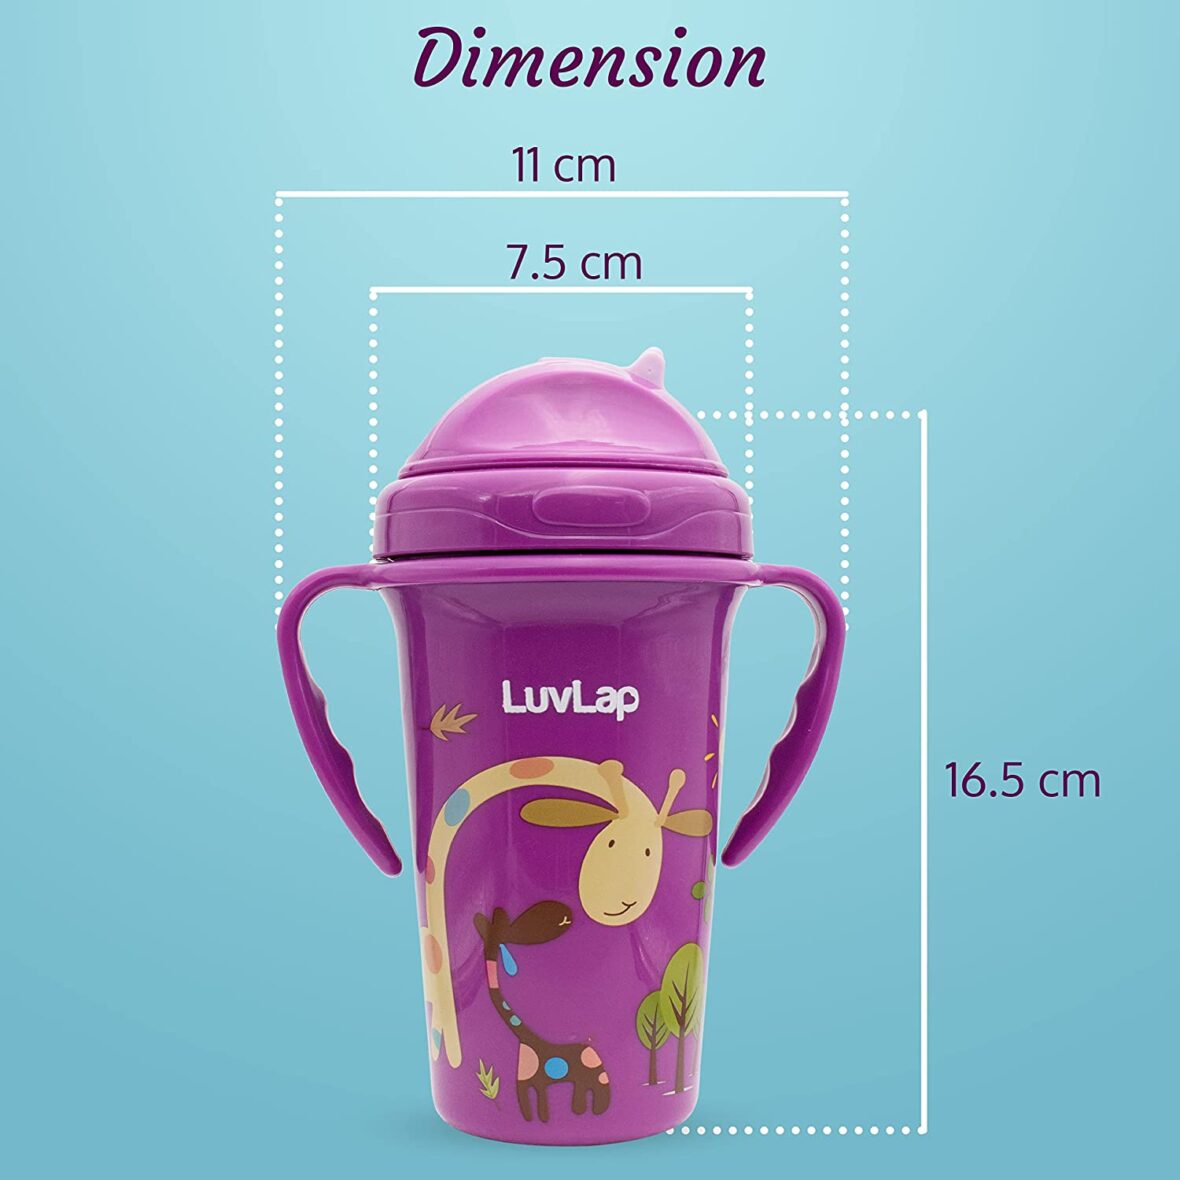 LuvLap Tiny Giffy Sipper/Sippy Cup 300ml, Anti-Spill Design with Soft Silicone Straw, 18m+